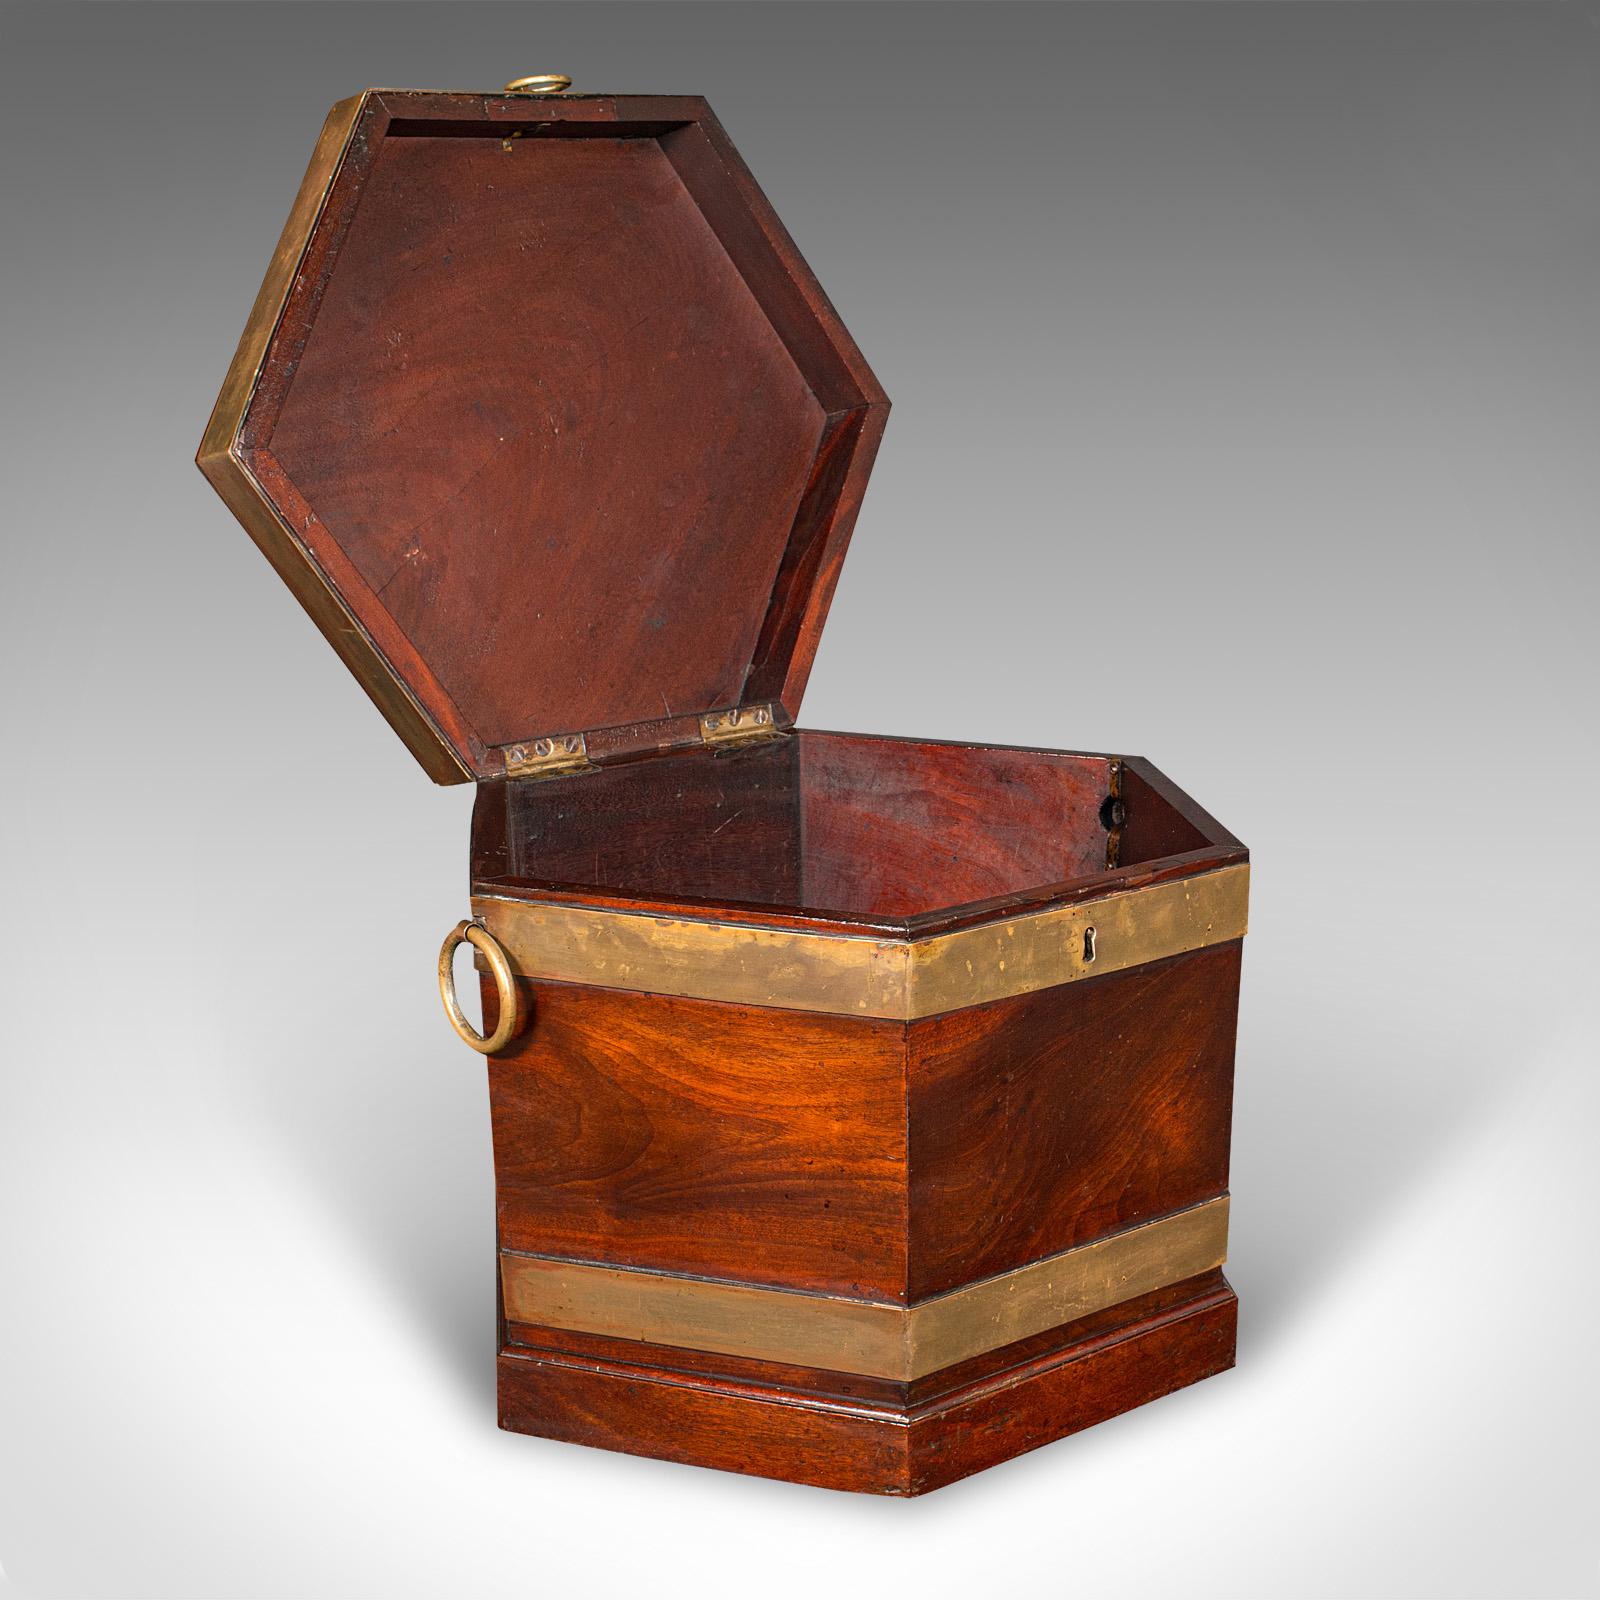 This is an antique cellarette. An English, mahogany and brass fireside store, dating to the Georgian period, circa 1750.

Fascinating hexagonal form with delightful figuring
Displays a desirable aged patina and in good order
Select stocks present